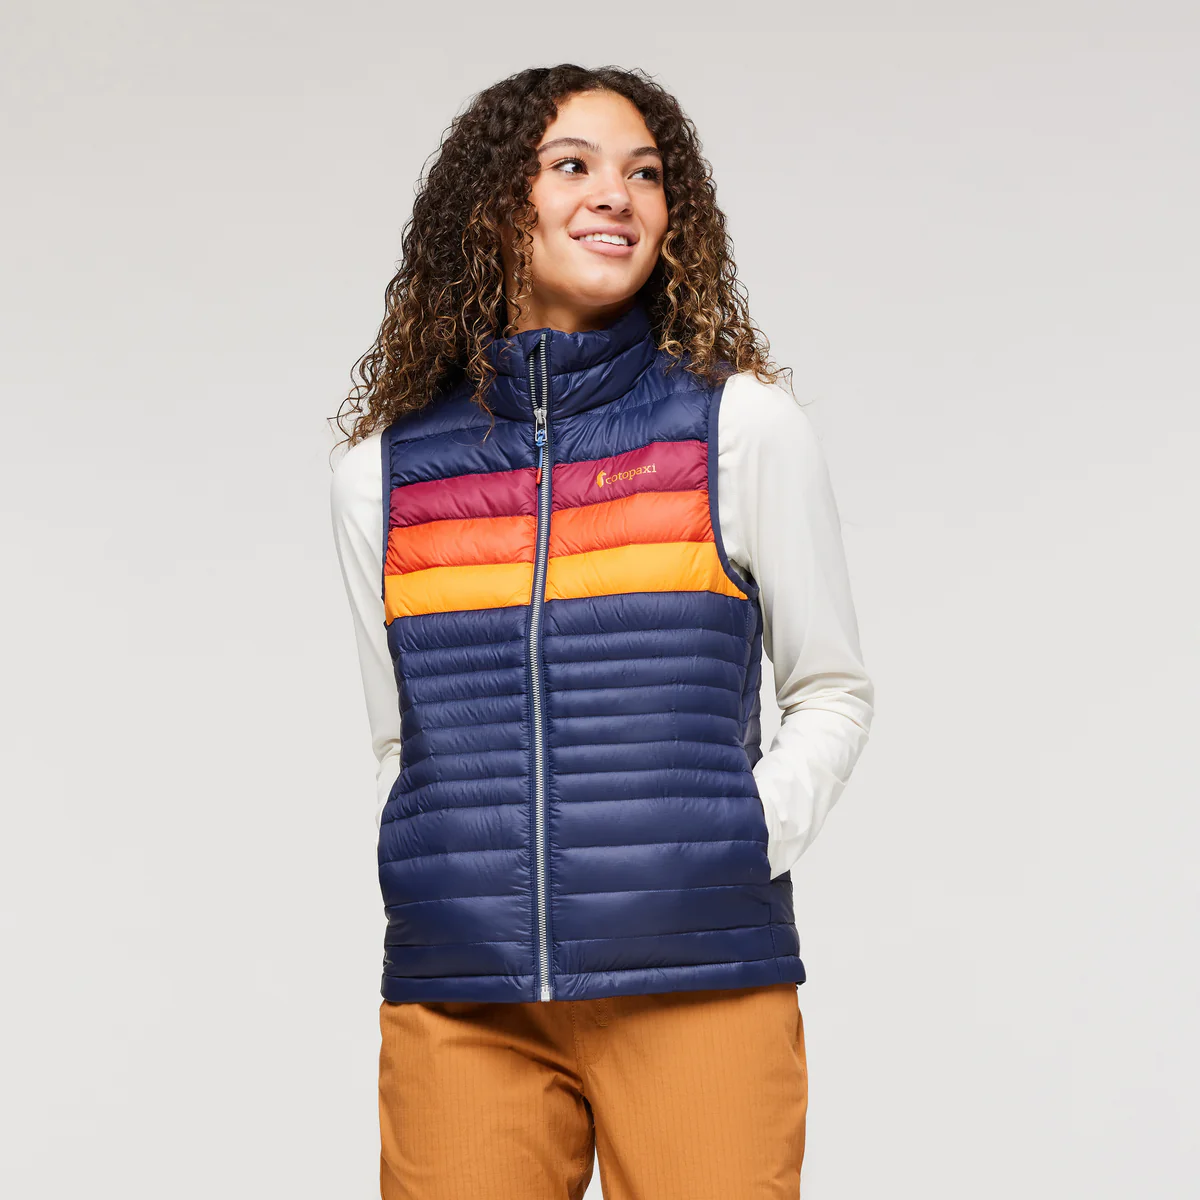 COTOPAXI WOMEN'S FUEGO DOWN VEST - MARITIME & RASPBERRY STRIPES - CLEARANCE XS